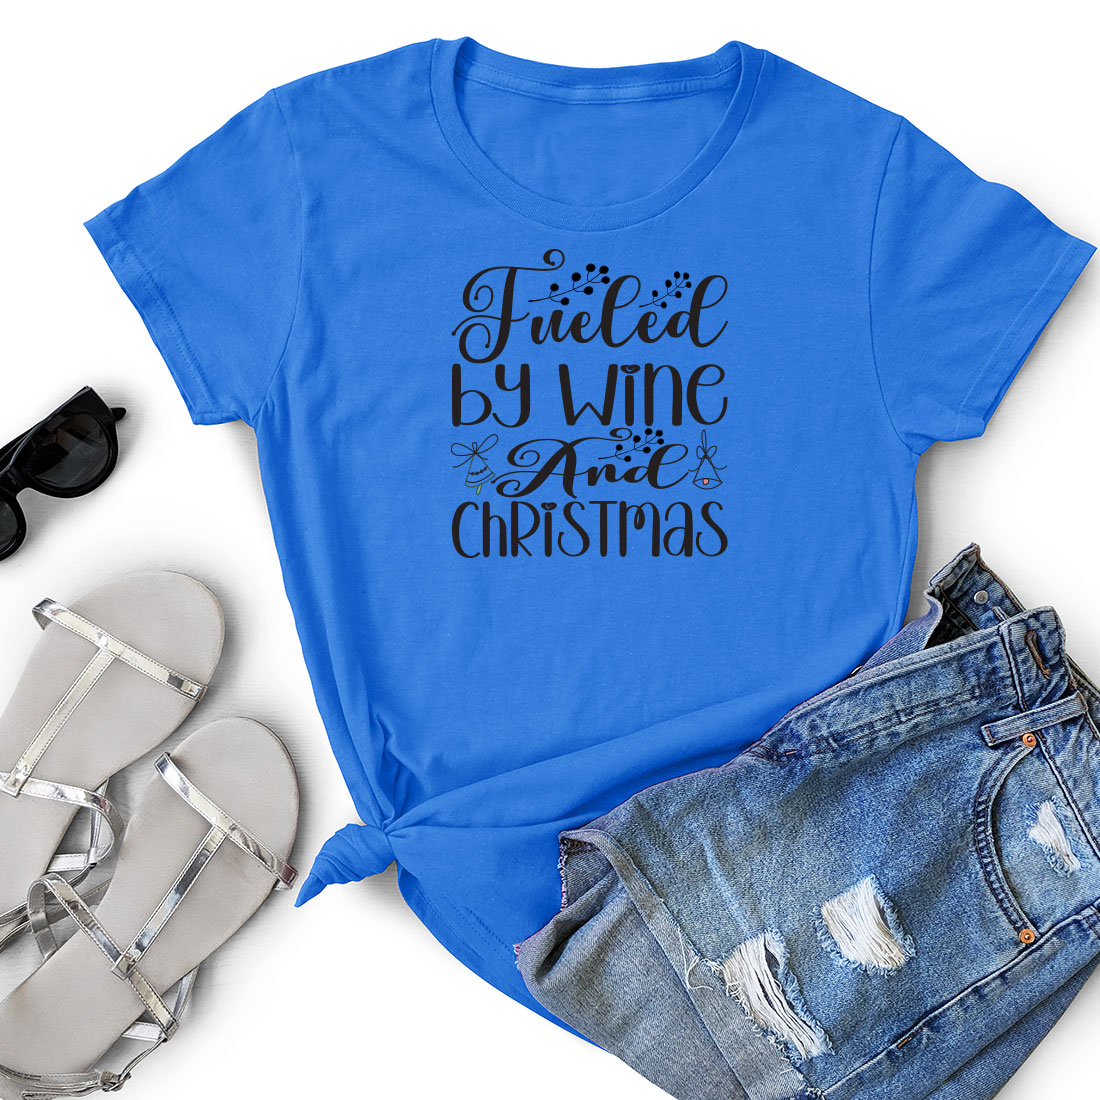 T - shirt that says fueled by wine and christmas.